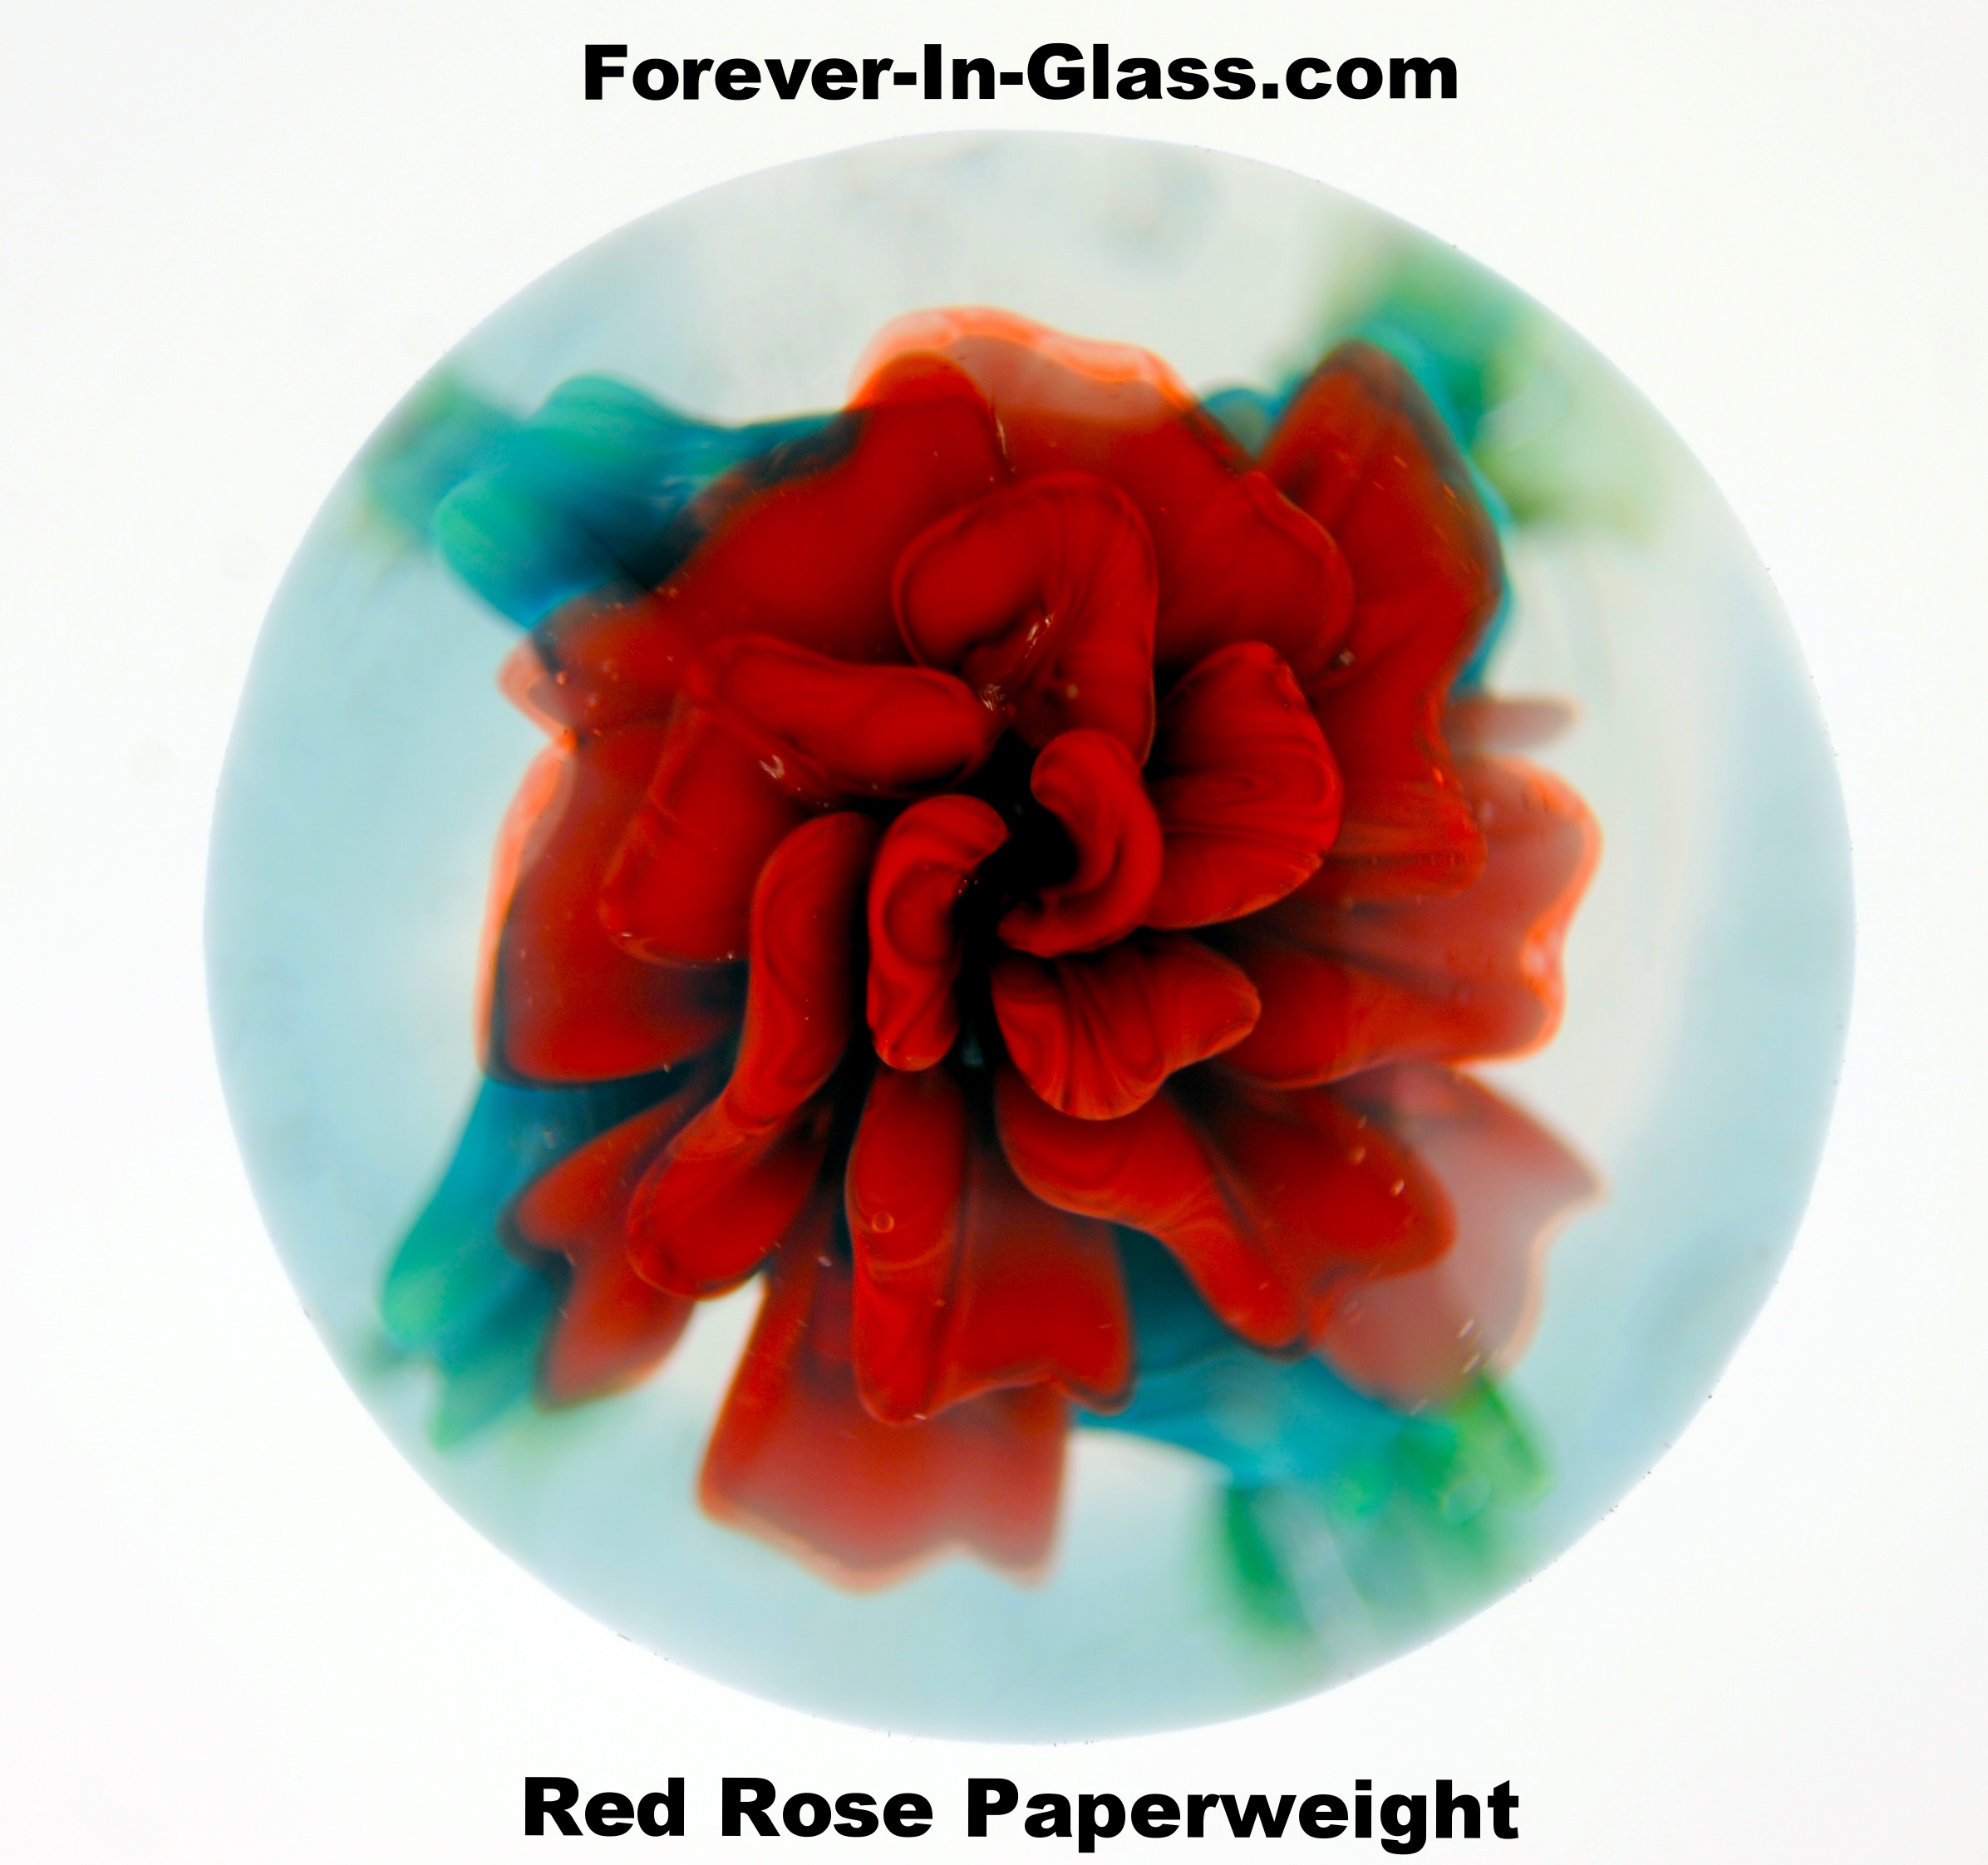 Red Rose Paperweight.JPG